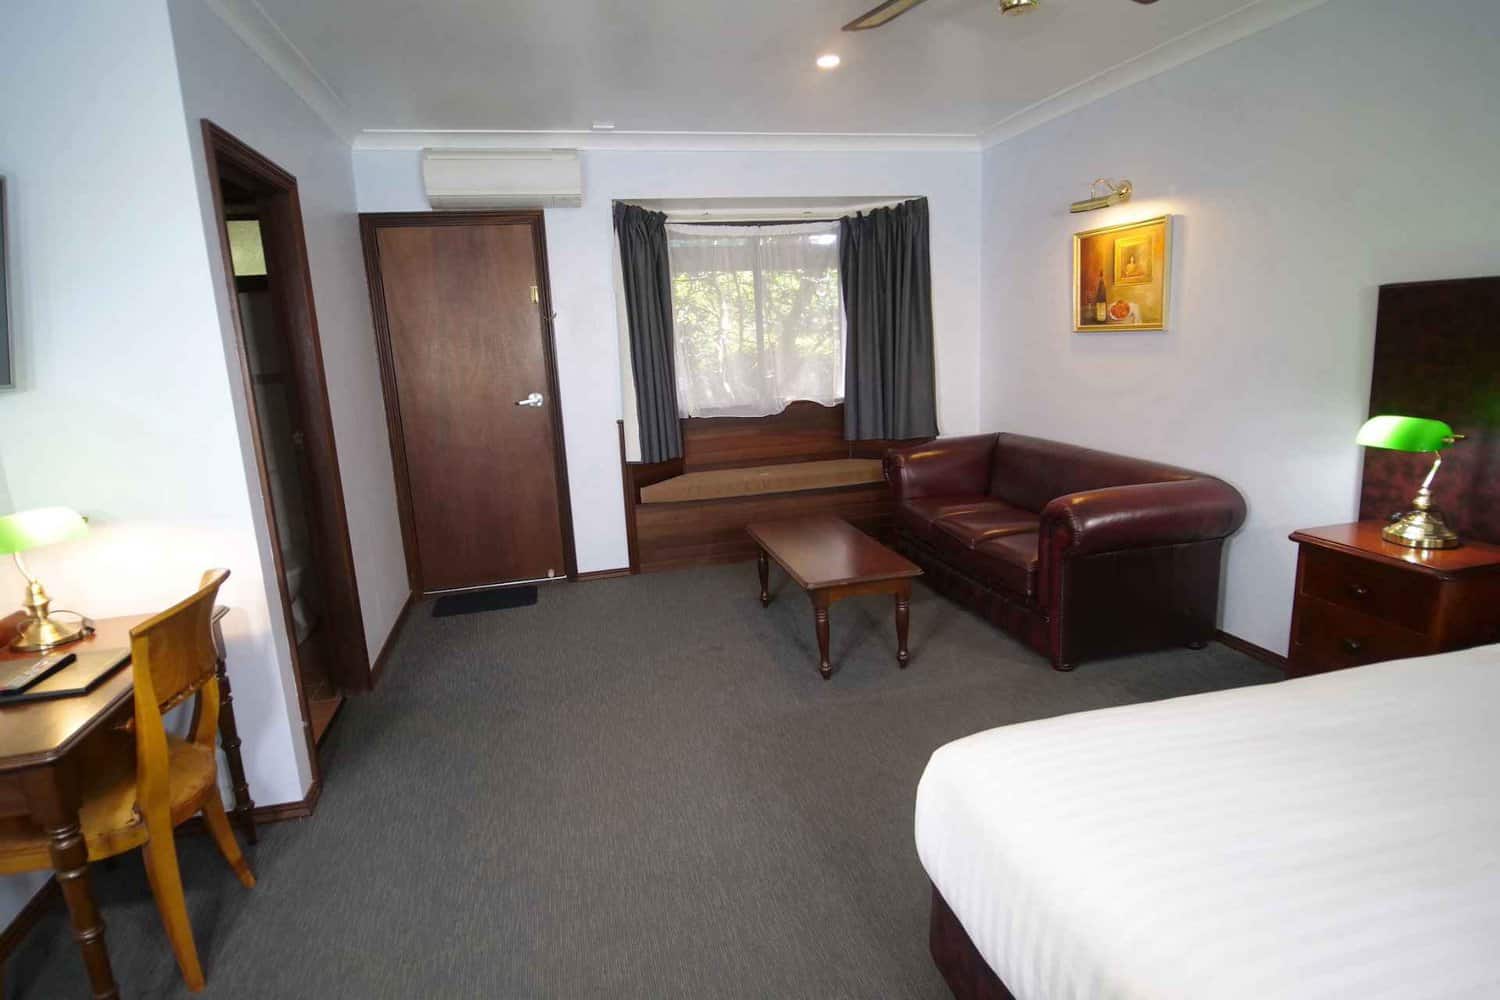 Elegant hotel room featuring a plush king-size bed with an imitation leather bedhead, bedside tables with lamps for cozy lighting, a comfortable couch for lounging, and a tasteful painting of a wine bottle on the wall, creating a warm and inviting atmosphere for guests